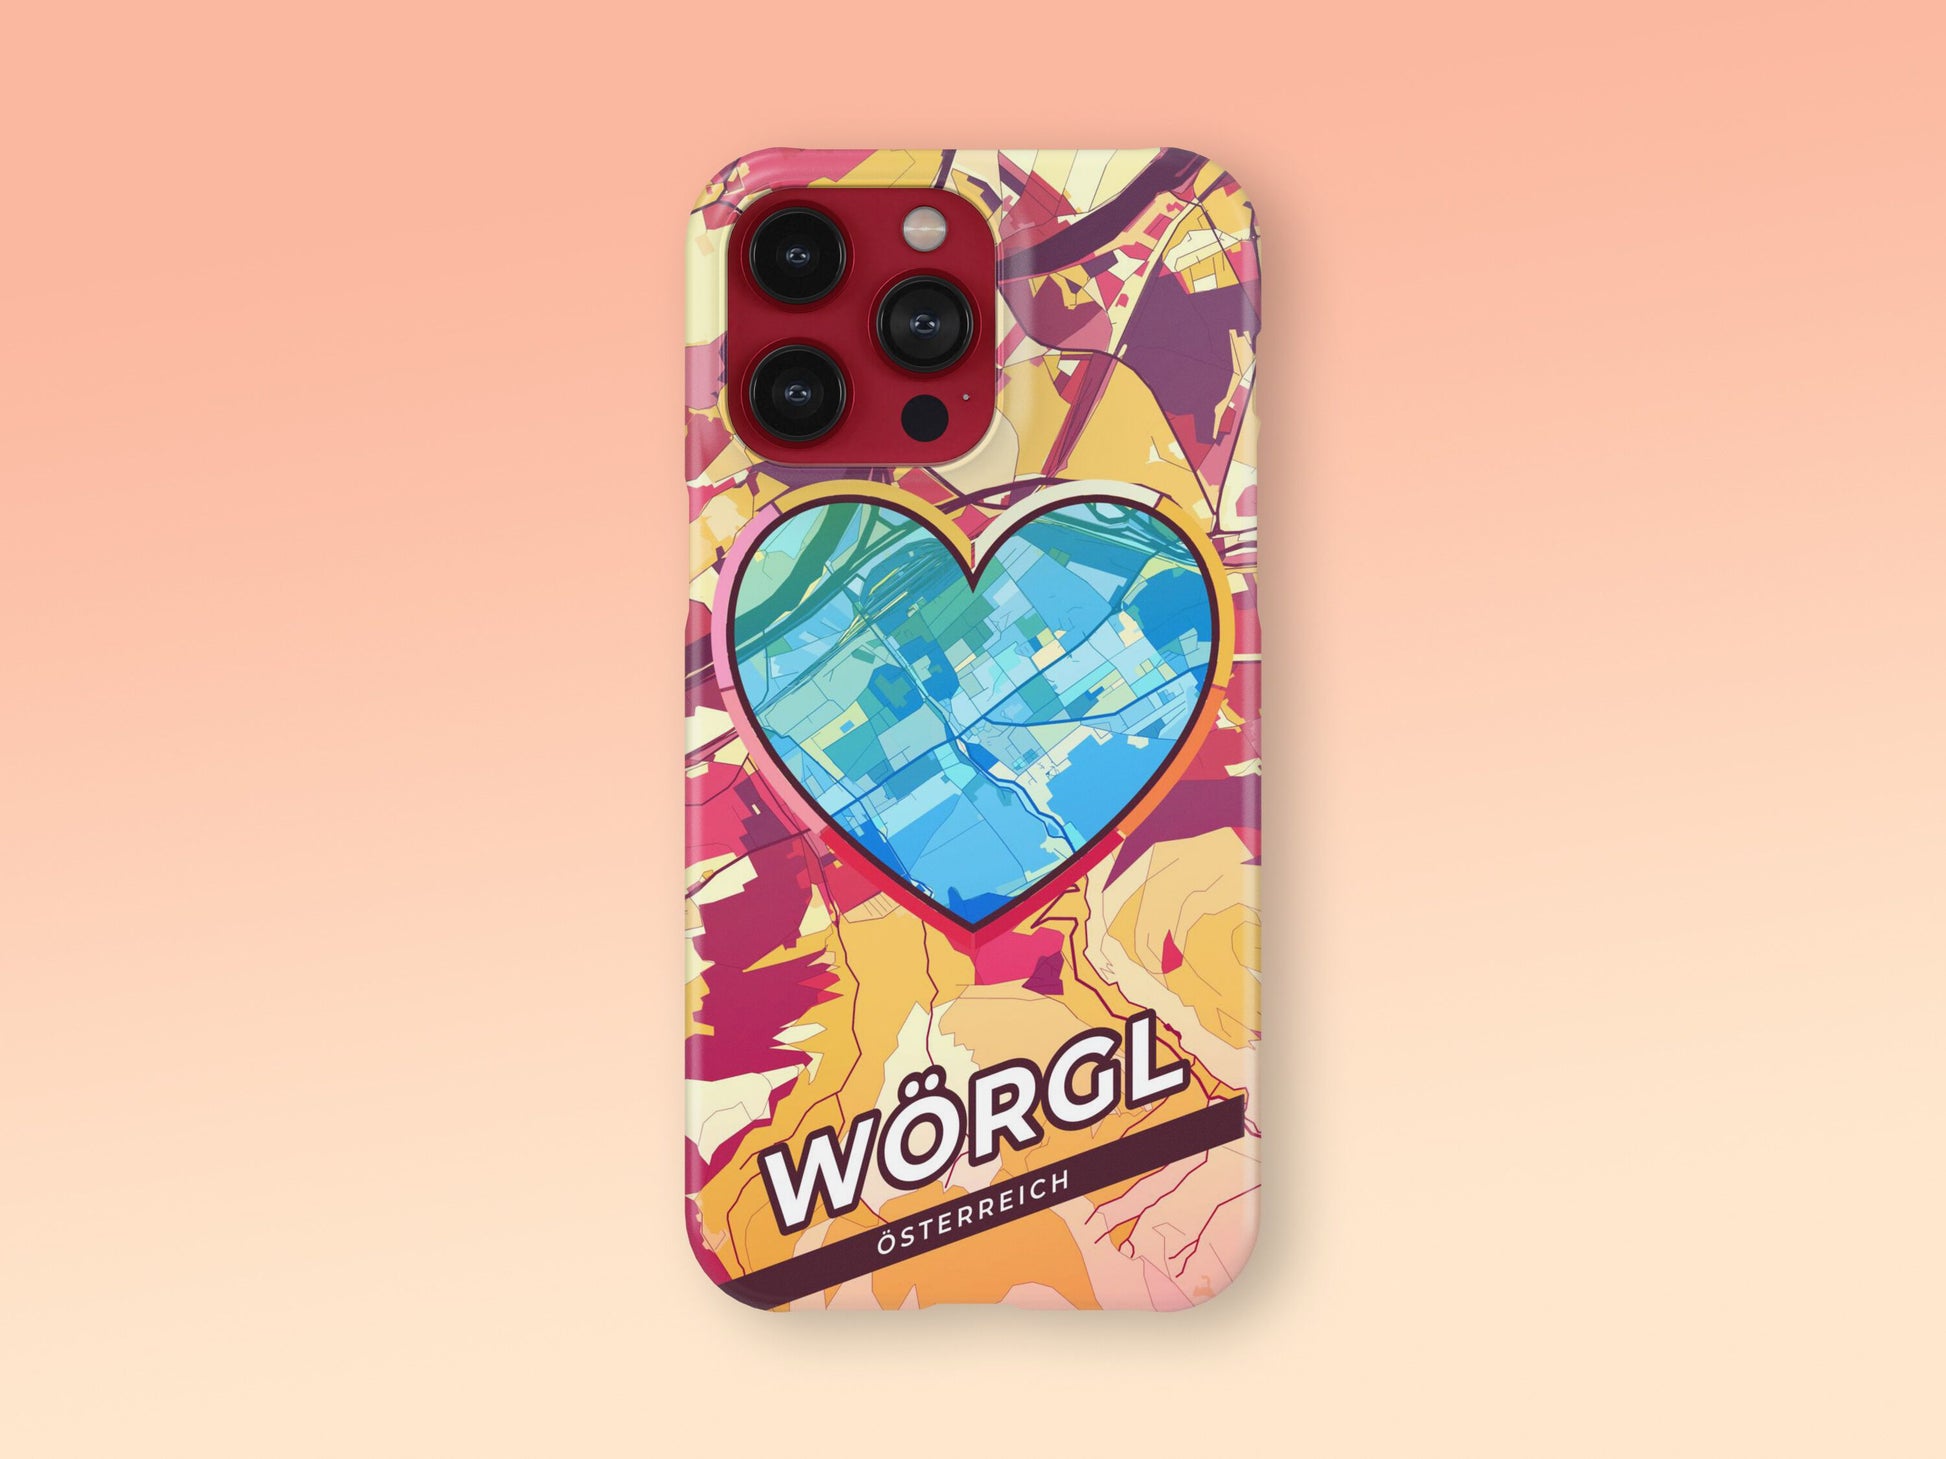 Wörgl Österreich slim phone case with colorful icon 2